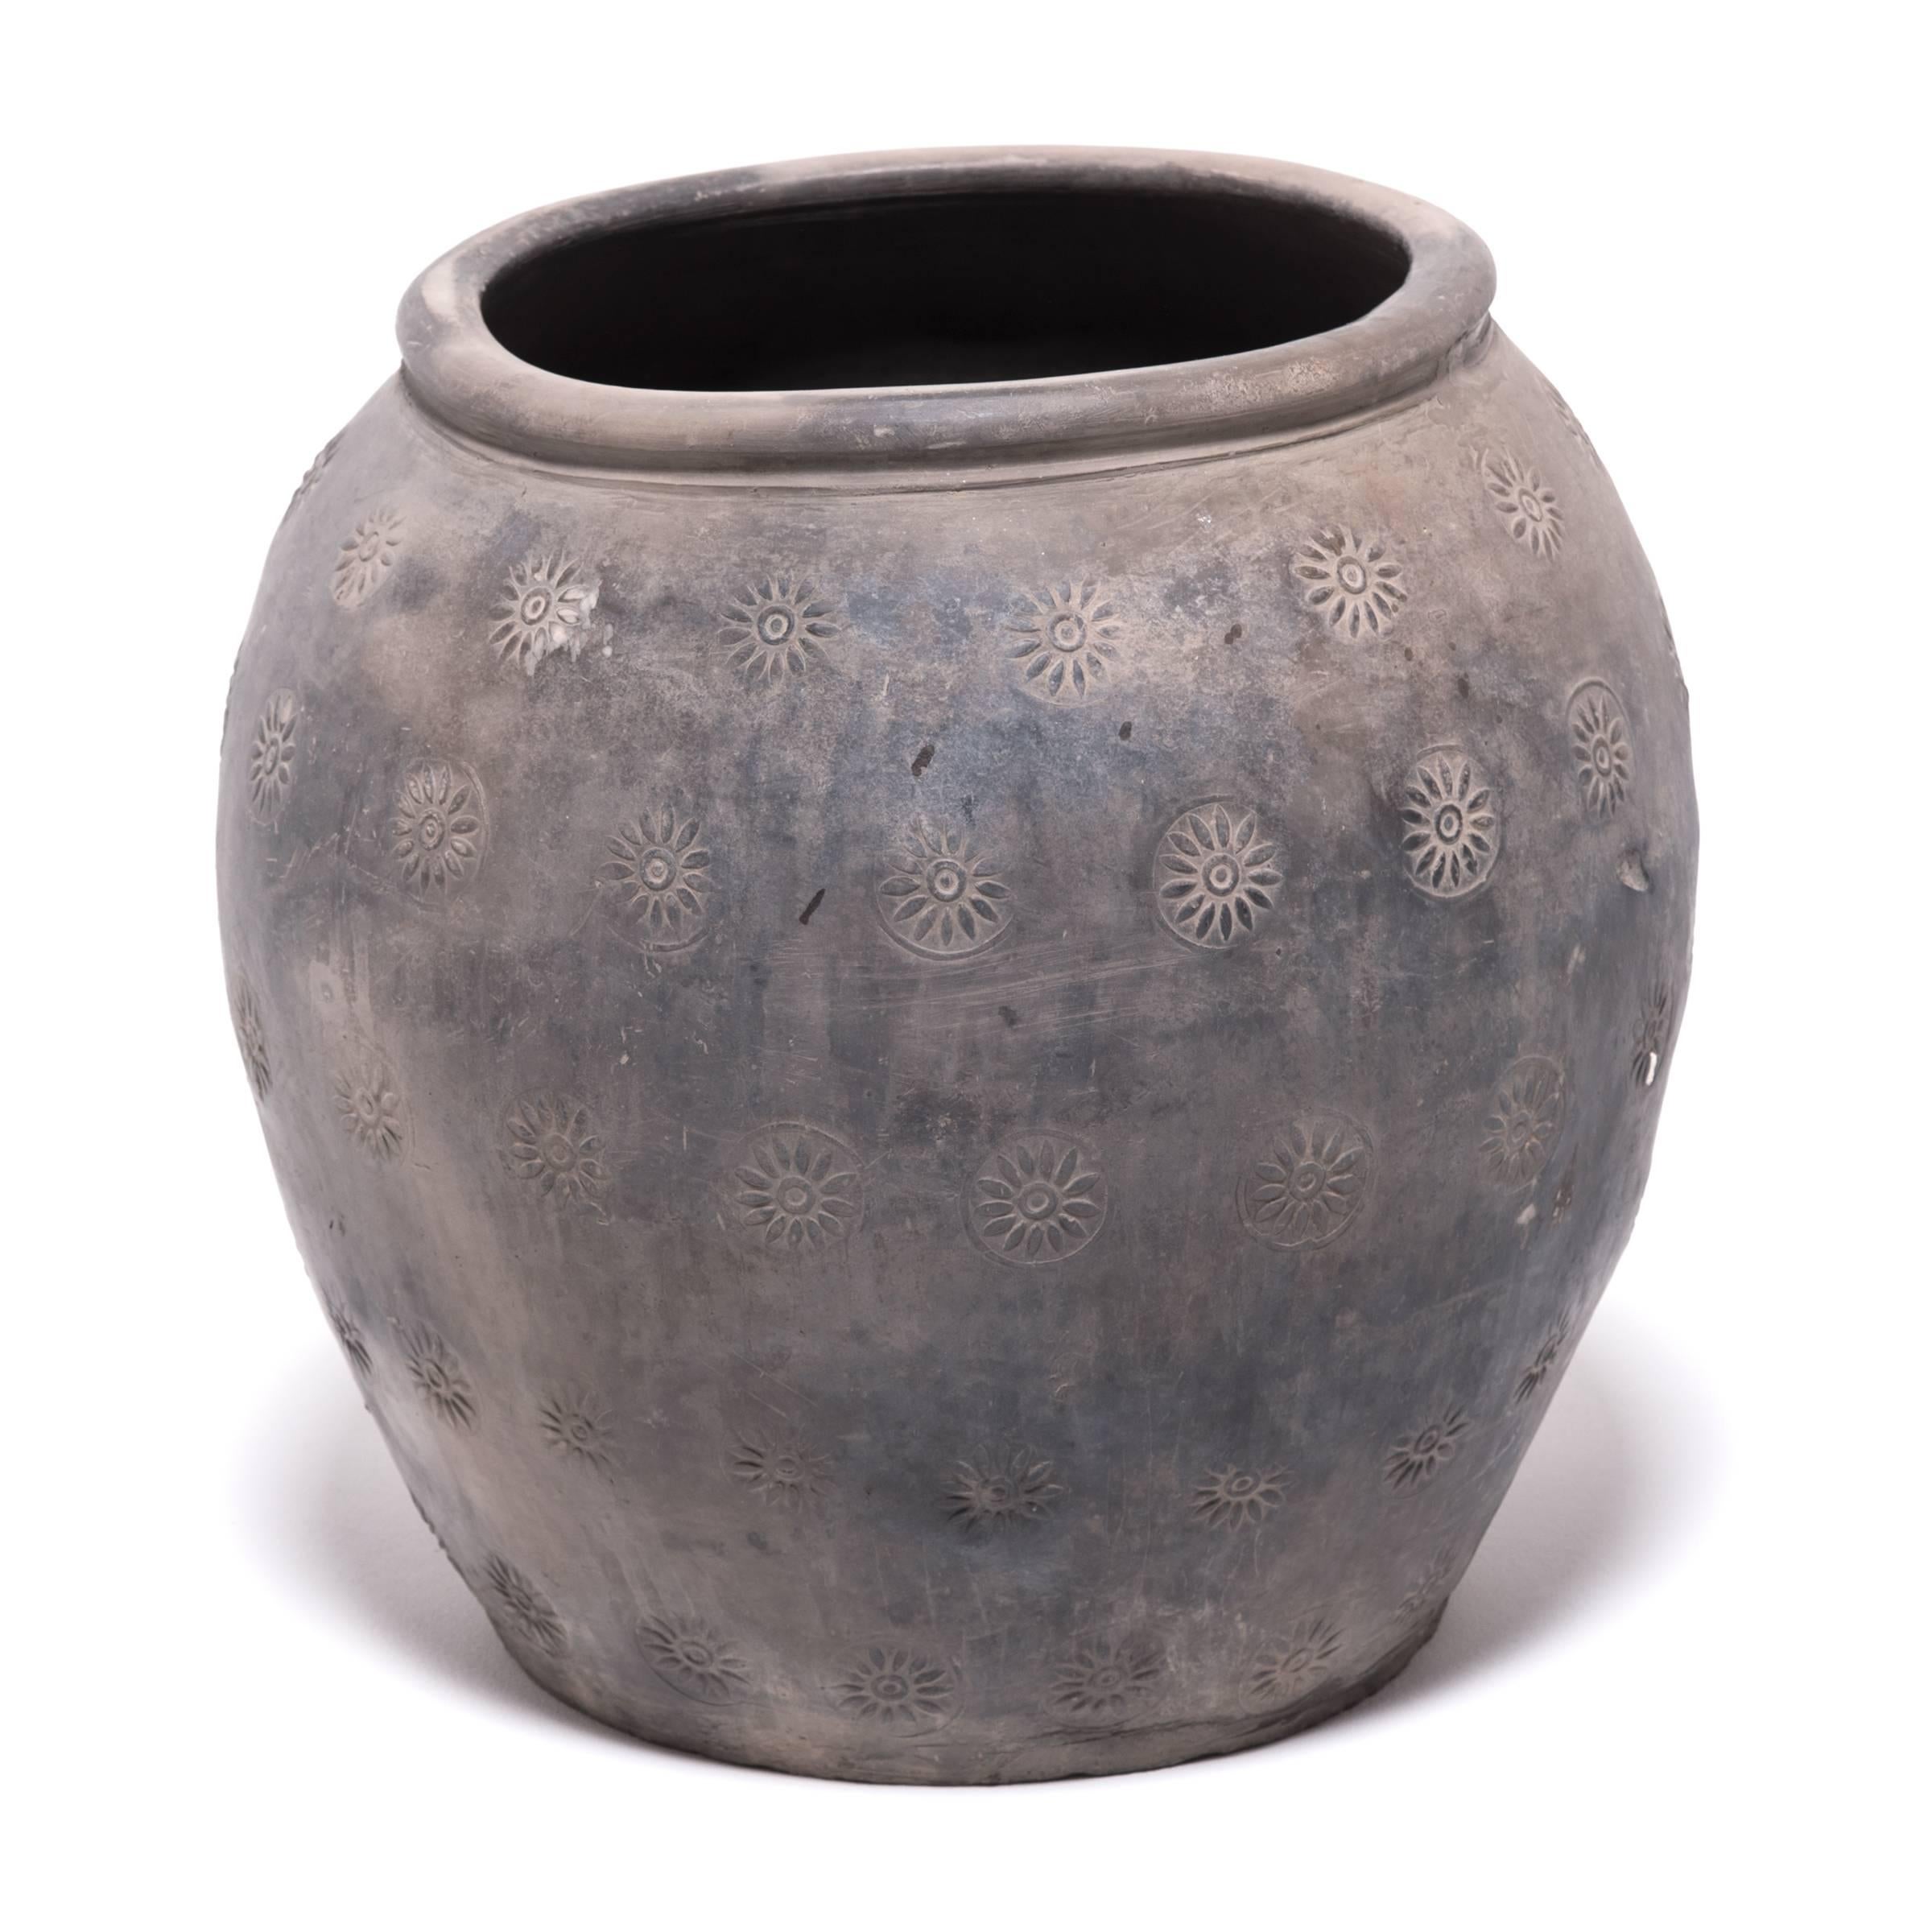 Over a century ago, a gifted potter from northern China crafted this organic clay jar out of rich dark river clay mined from the river basins of Asia. The surface is stamped with a series of simple floral patterns. The remaining clay is left